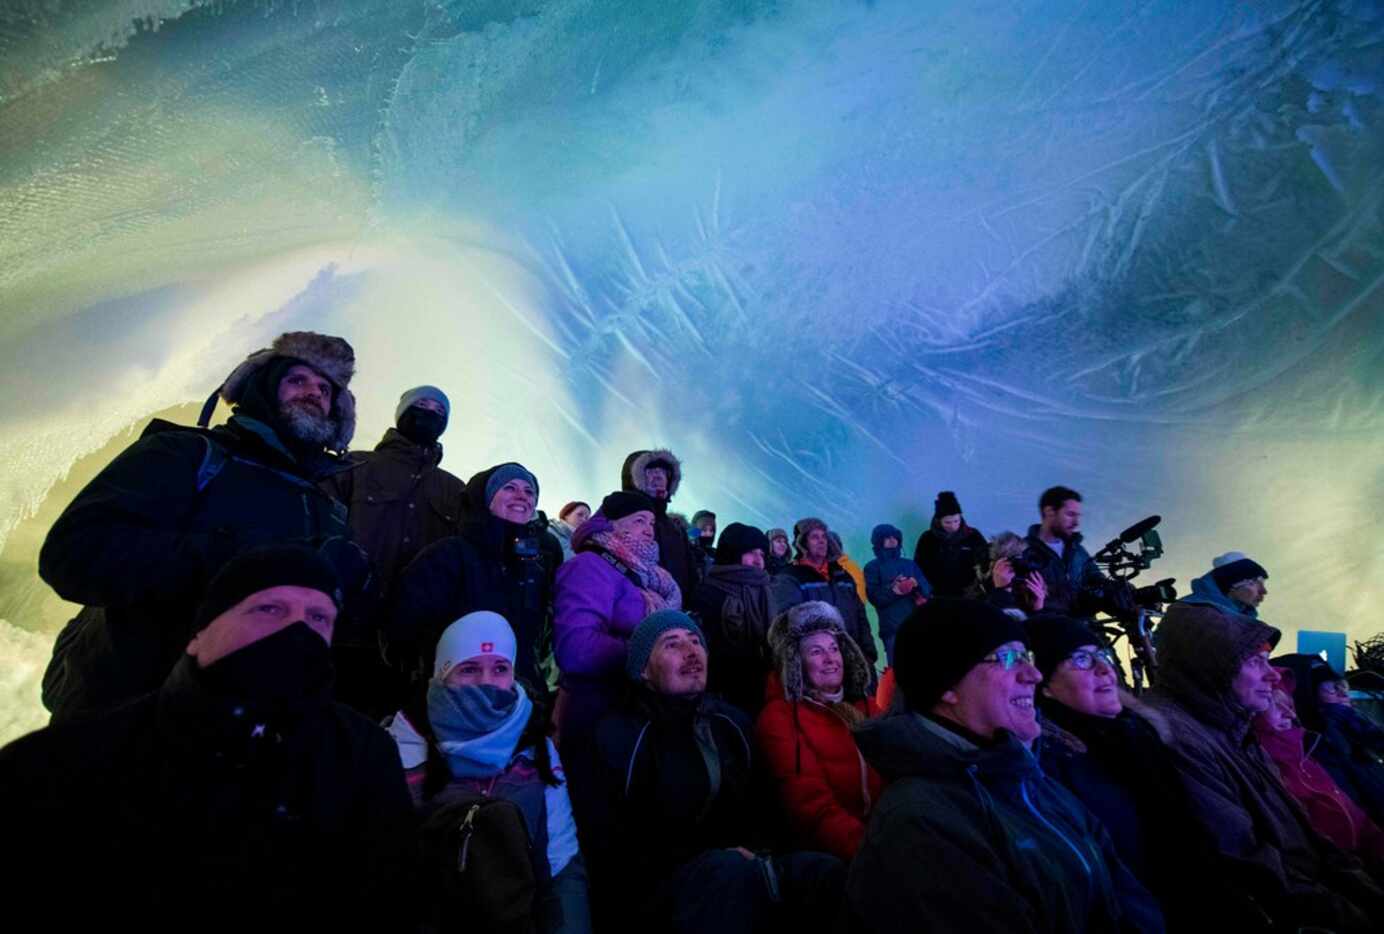 People attend the Ice Music Festival on Feb. 2, 2018 in the small mountain village of Finse...